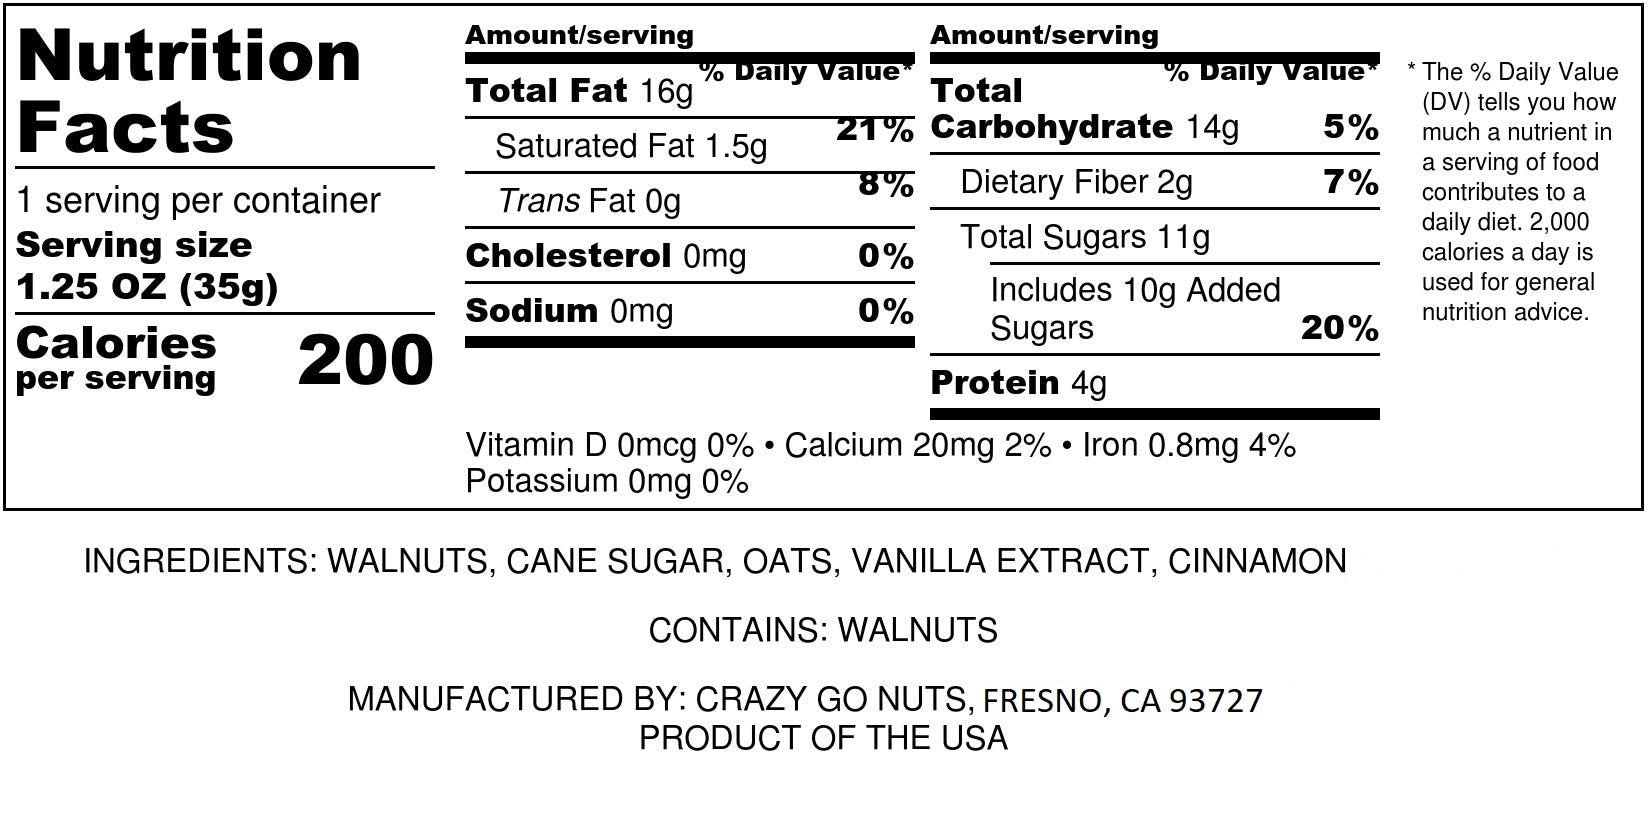 Nutrition panel for oatmeal cookie coated walnut snacks. Ingredients include walnuts. cane sugar, oats, vanilla extract, and cinnamon